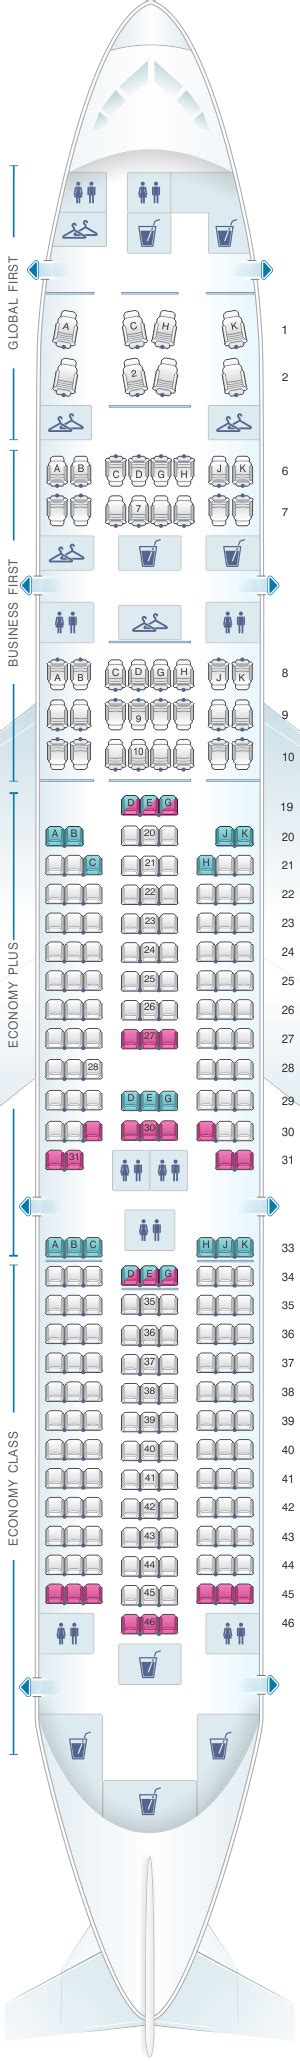 For your next United flight, use this seating chart to get the most comfortable ... Airlines > United > Planes & Seat Maps > United Seat Maps. ... Boeing 777-200 (772 ... . 